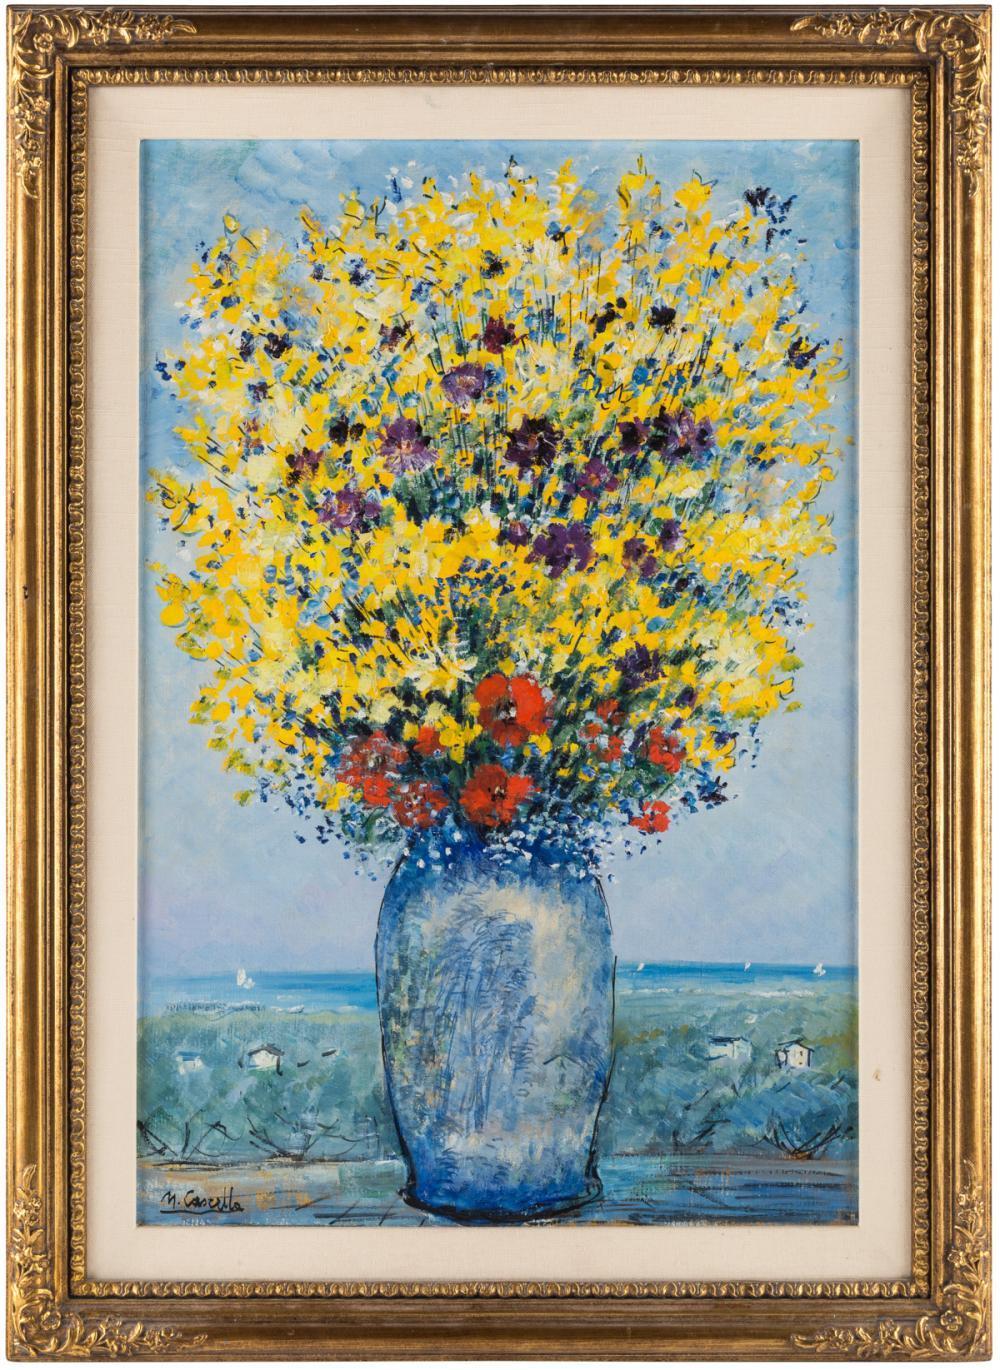 Michele Cascella (Italian 1892-1989). 
Bouquet of Field Flowers Before a Landscape, 
Oil on canvas 
Measures: 76.5 x 51 cm (30 1/8 x 20 1/8 in.) .
Signed lower left.

Provenance:
Sotheby's, New York, October 7, 2008, lot 190, Sold for